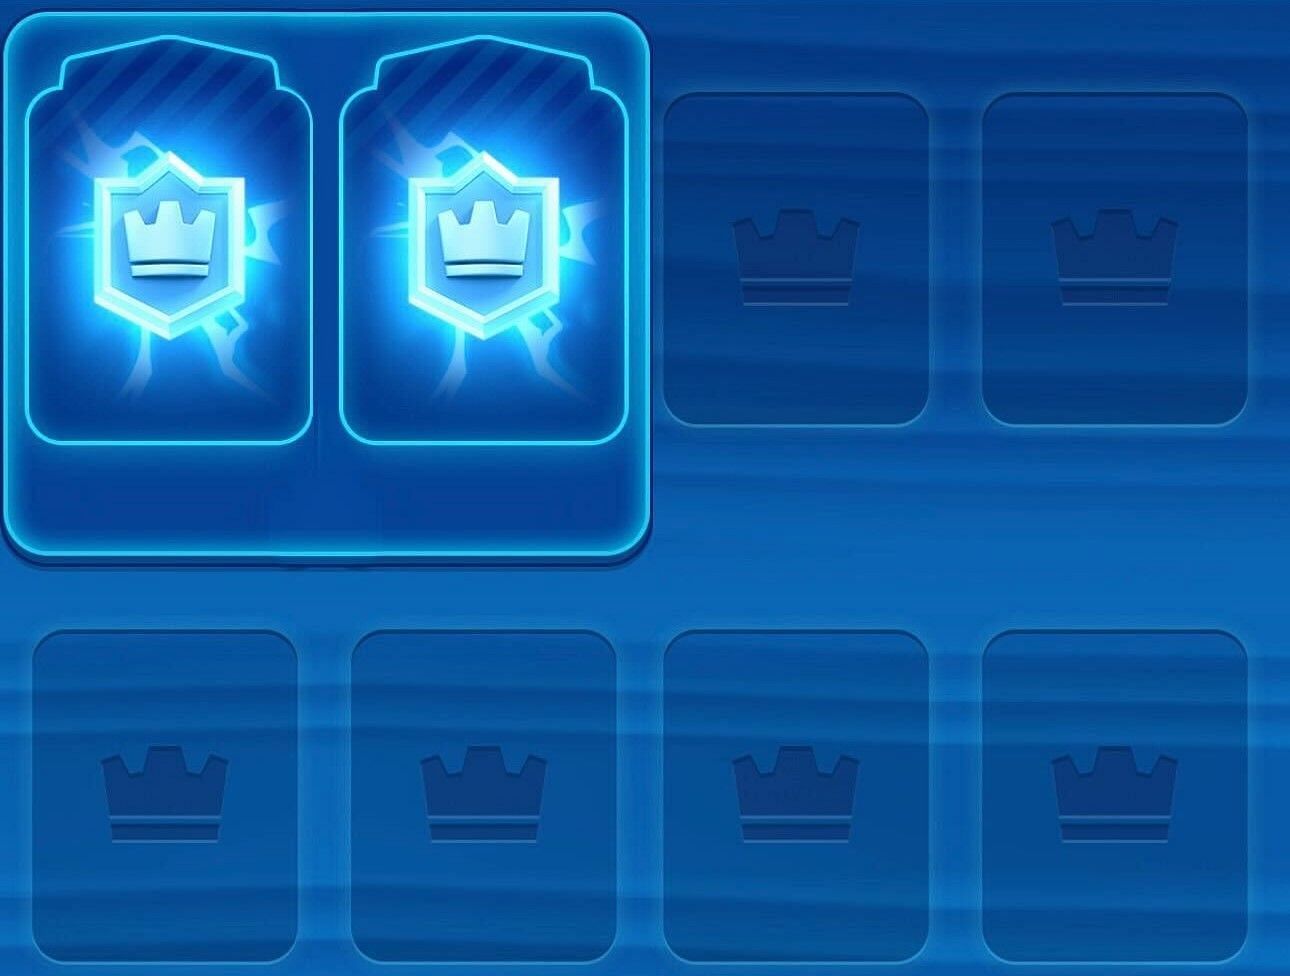 Second evolution slot in Clash Royale